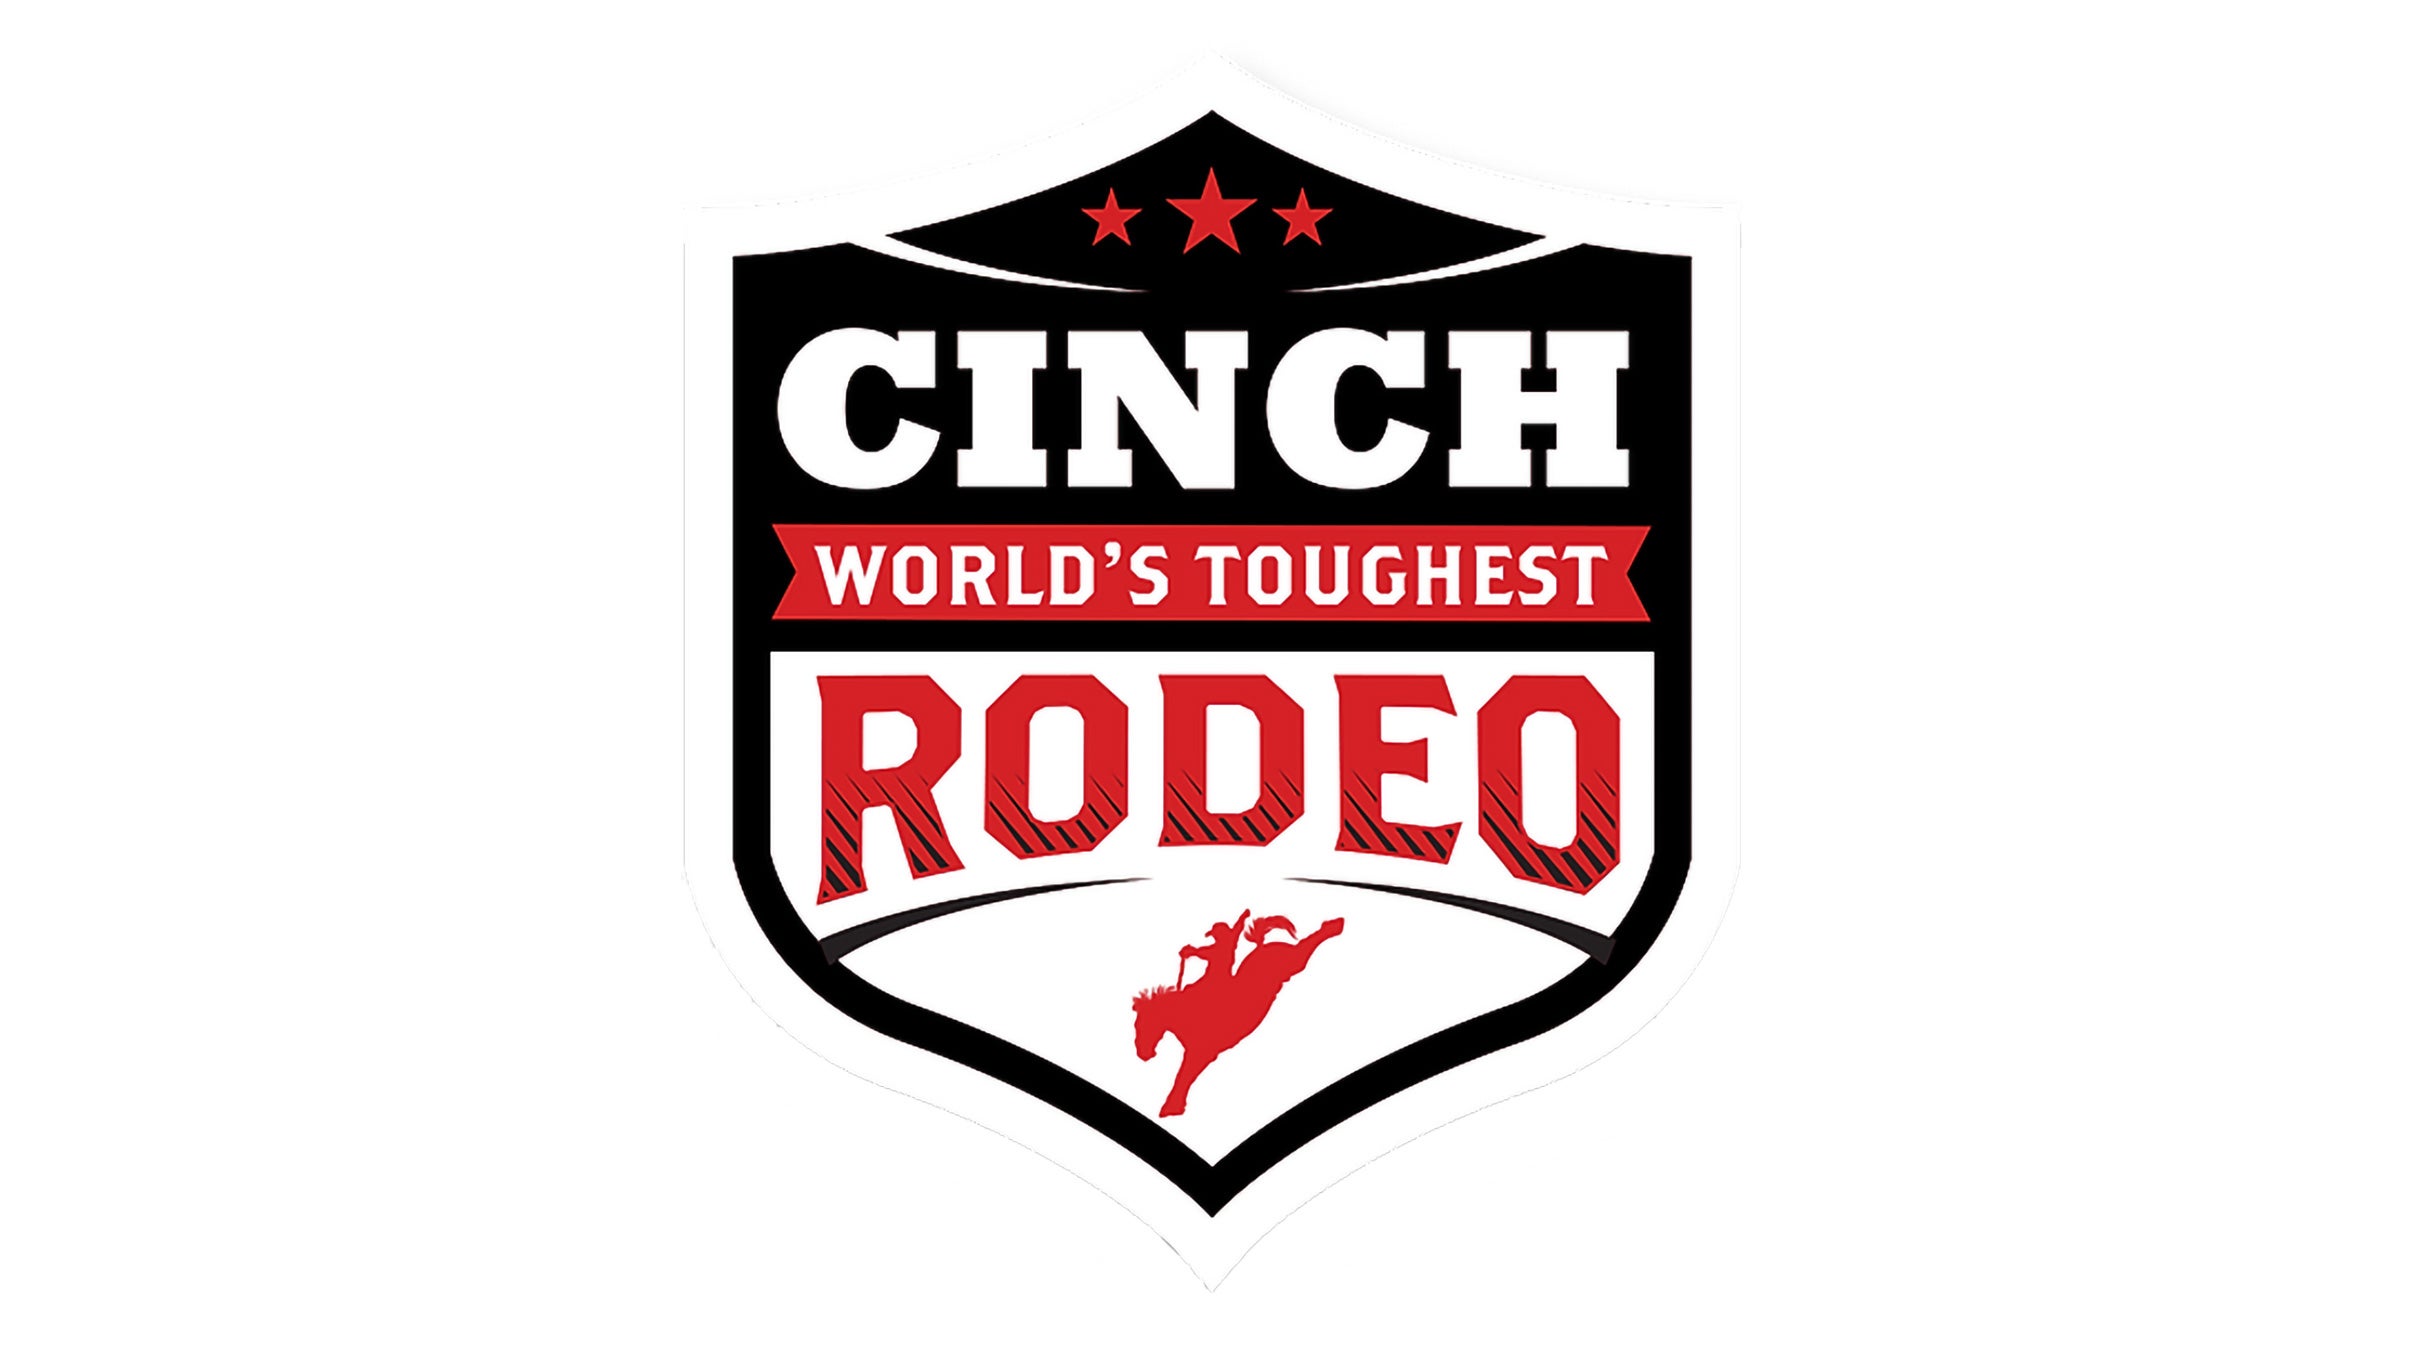 Cinch World's Toughest Rodeo presale code for genuine tickets in Columbia